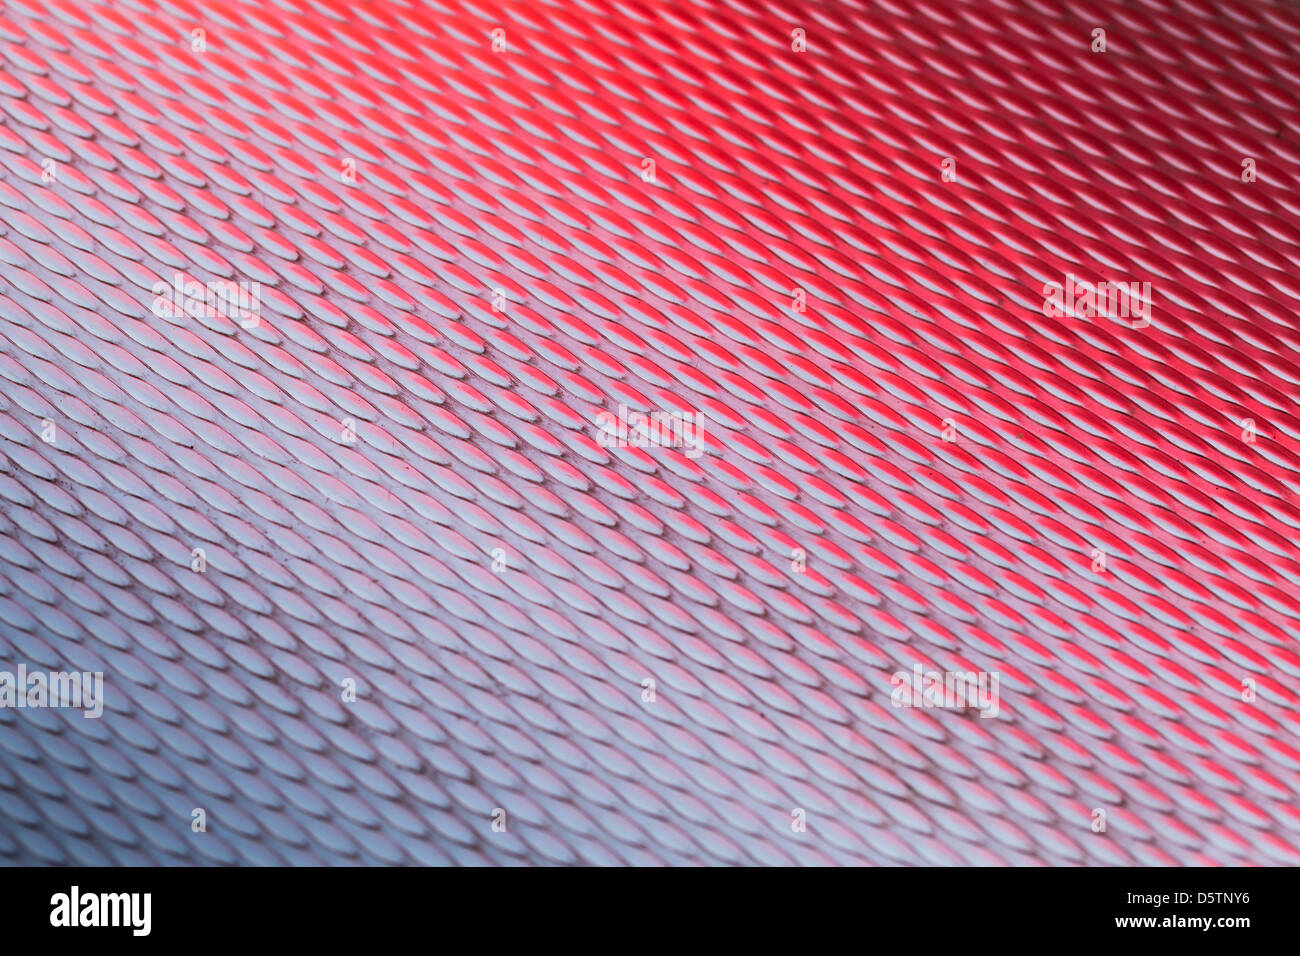 Metal surface with diamond pattern and red reflections Stock Photo